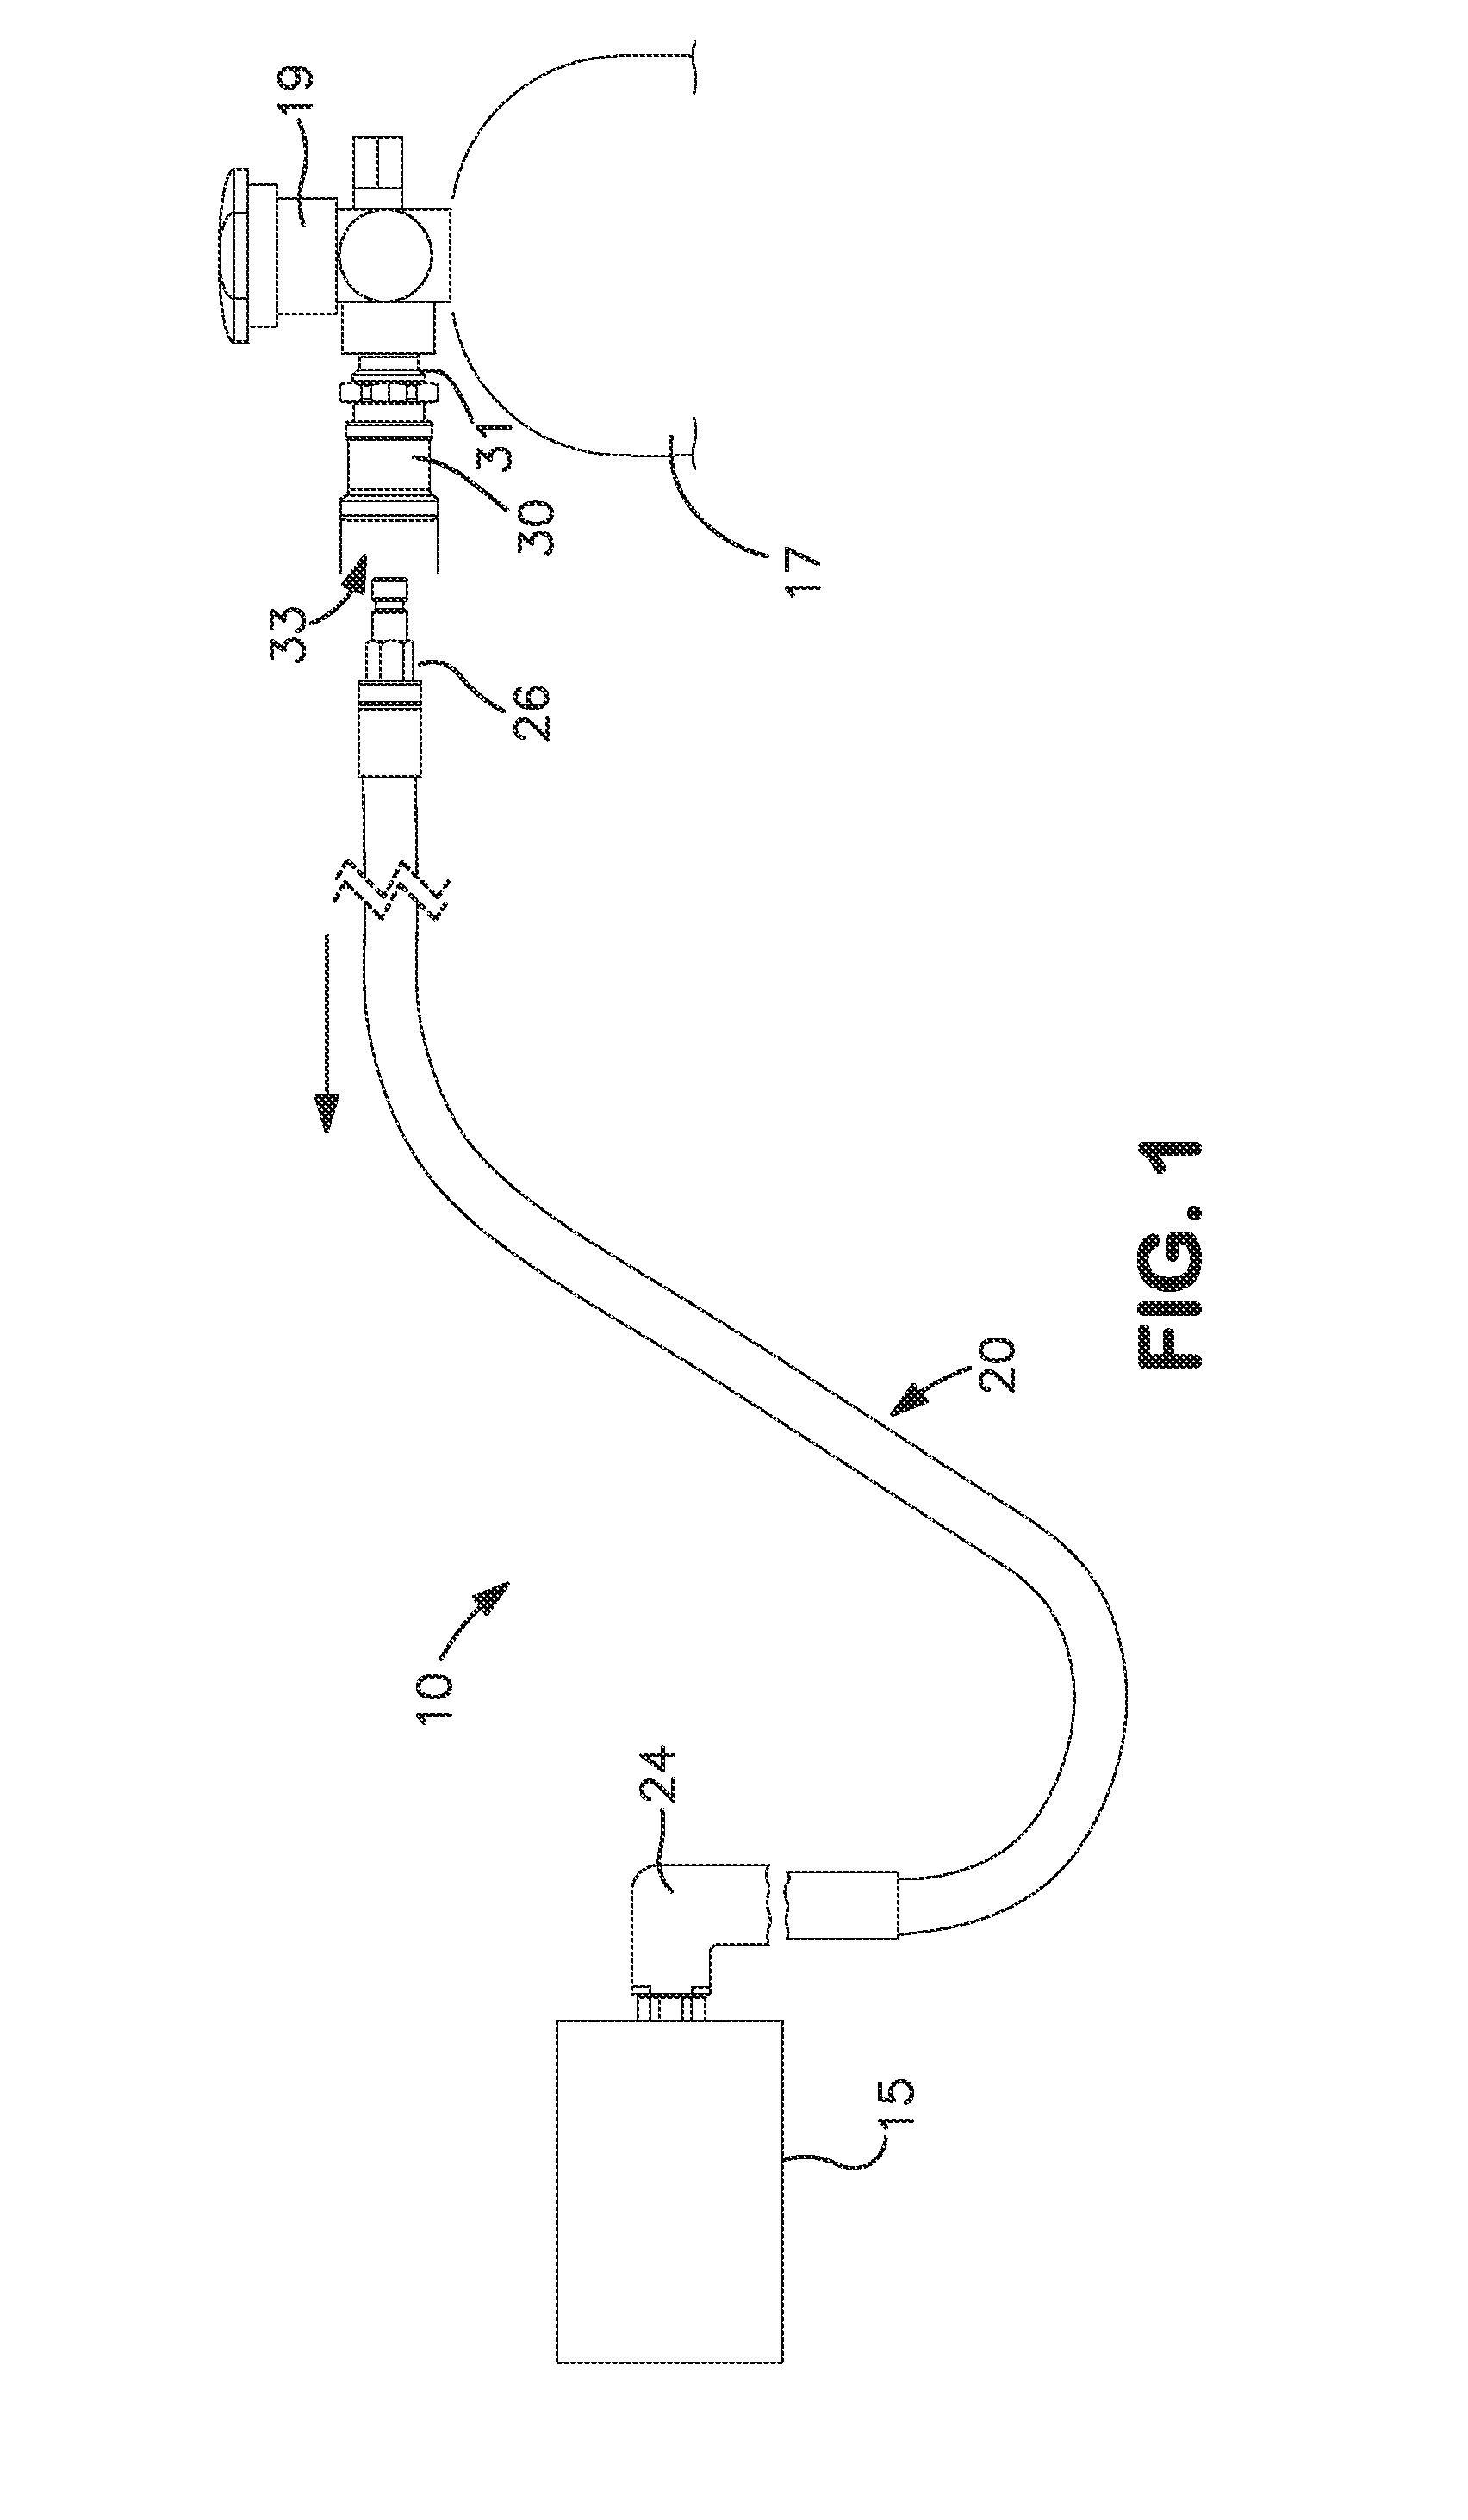 Connector assembly for medical gas applications